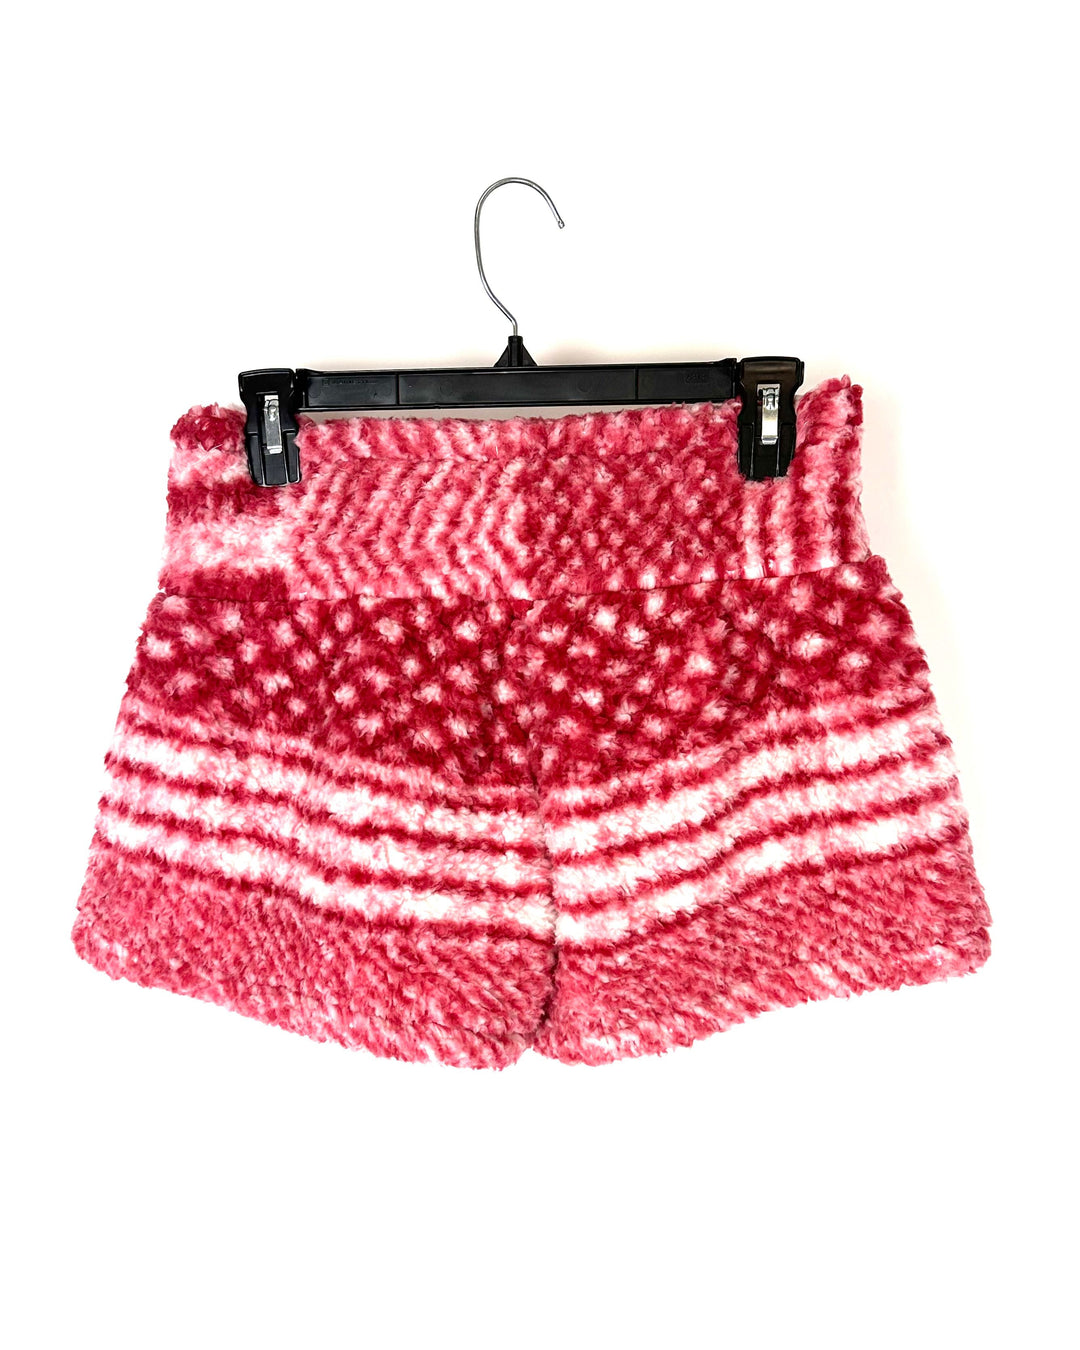 Red and White Fleece Pajama Shorts - Small